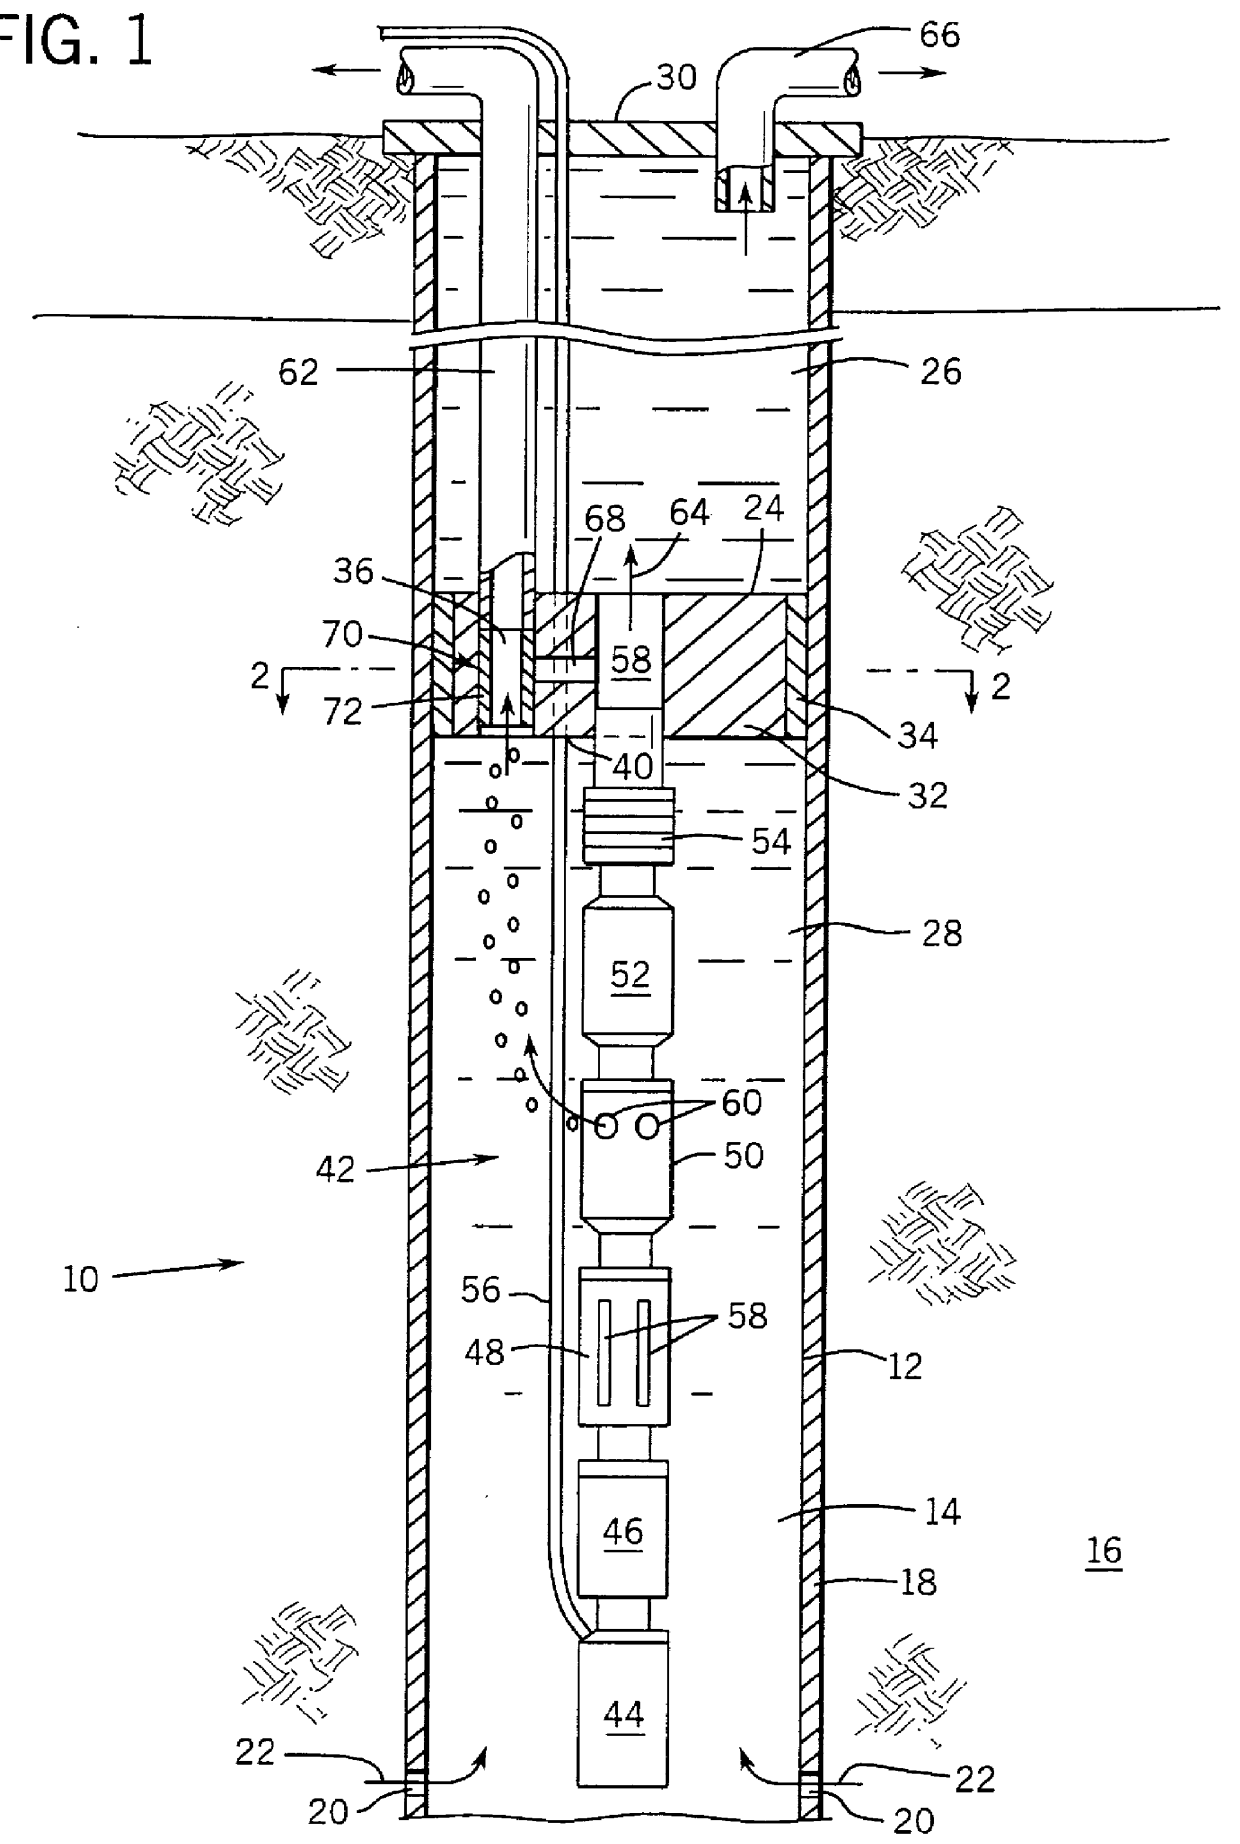 Well completion system employing multiple fluid flow paths